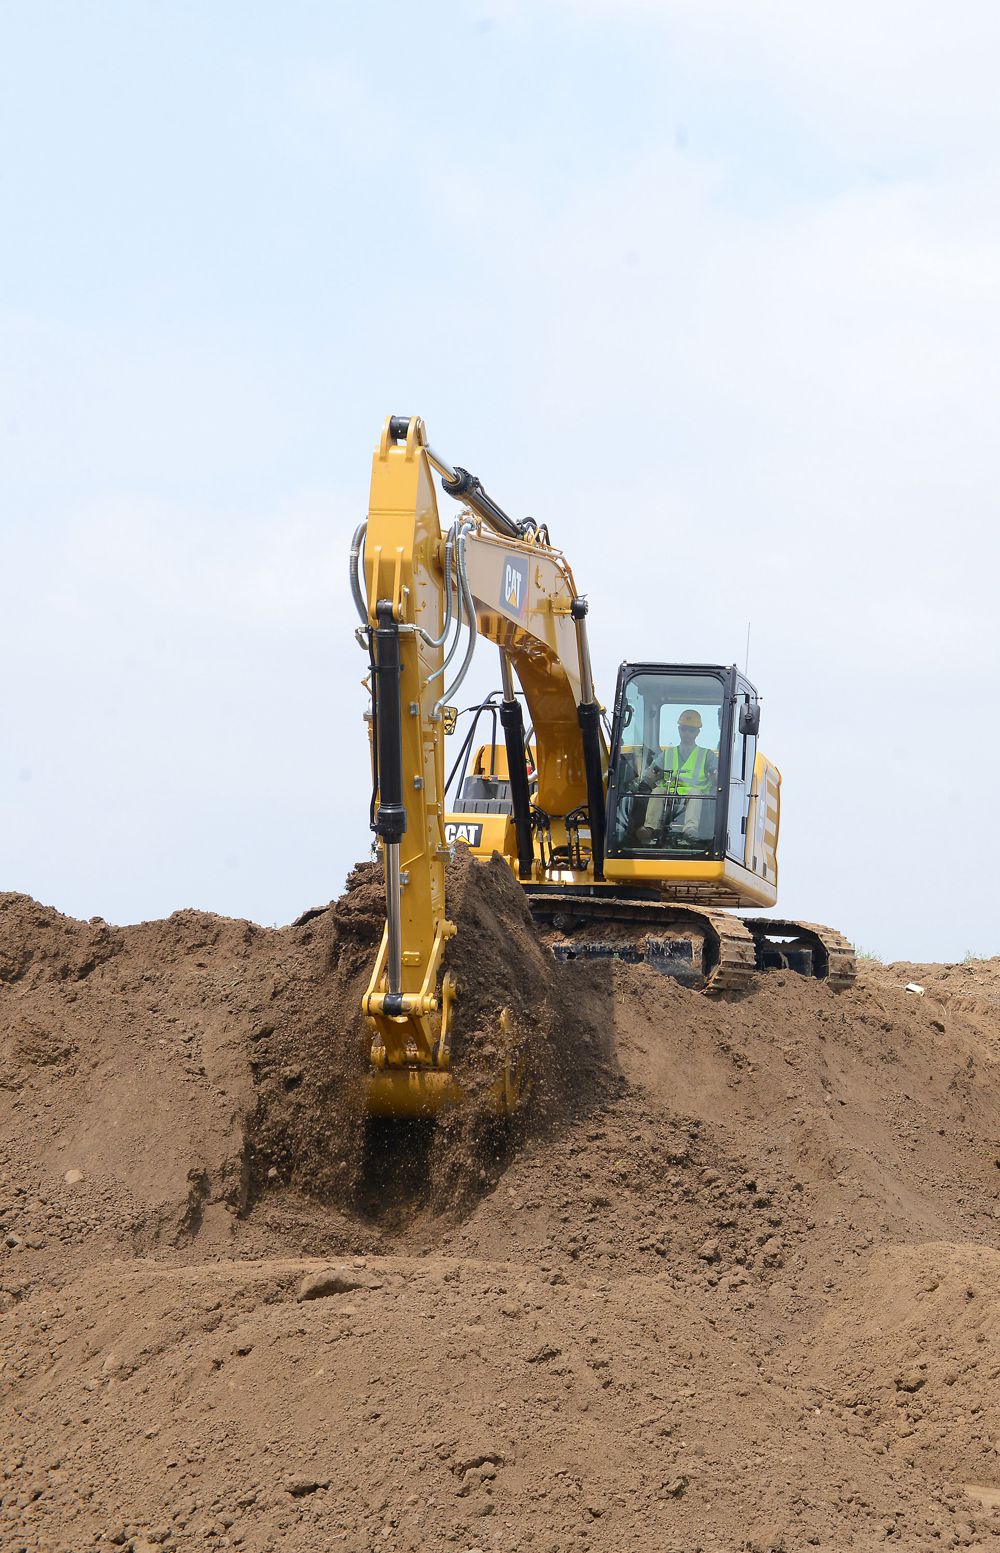 Three Next Generation 20-ton size class excavators from Caterpillar—the 320 GC, 320 and 323—increase operating efficiency, lower fuel and maintenance costs, and improve operator comfort compared to previous models. 